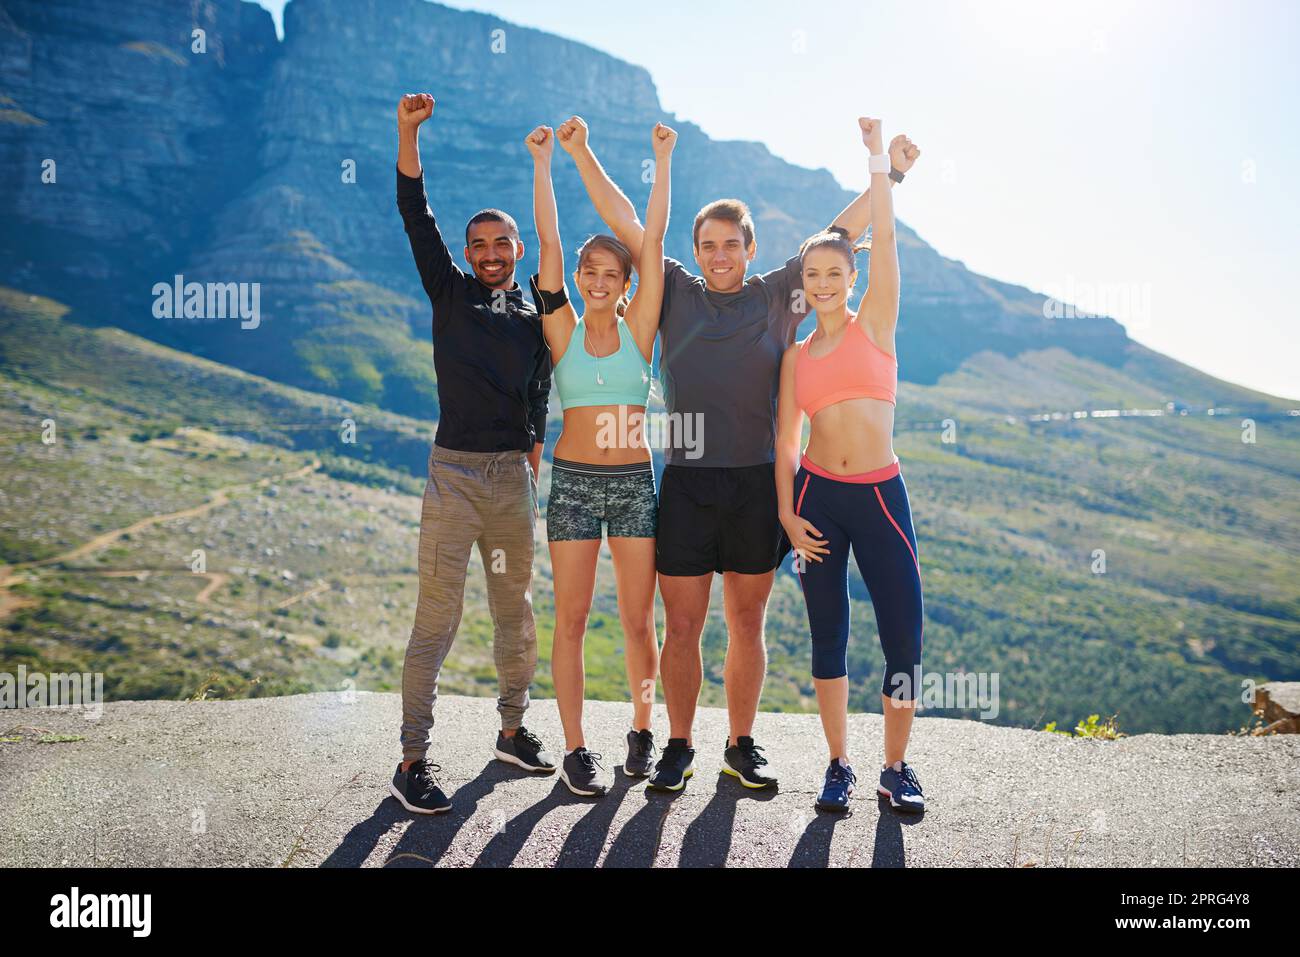 It pays to have a healthier outlook on life. Portrait of a fitness group celebrating after a workout outside. Stock Photo